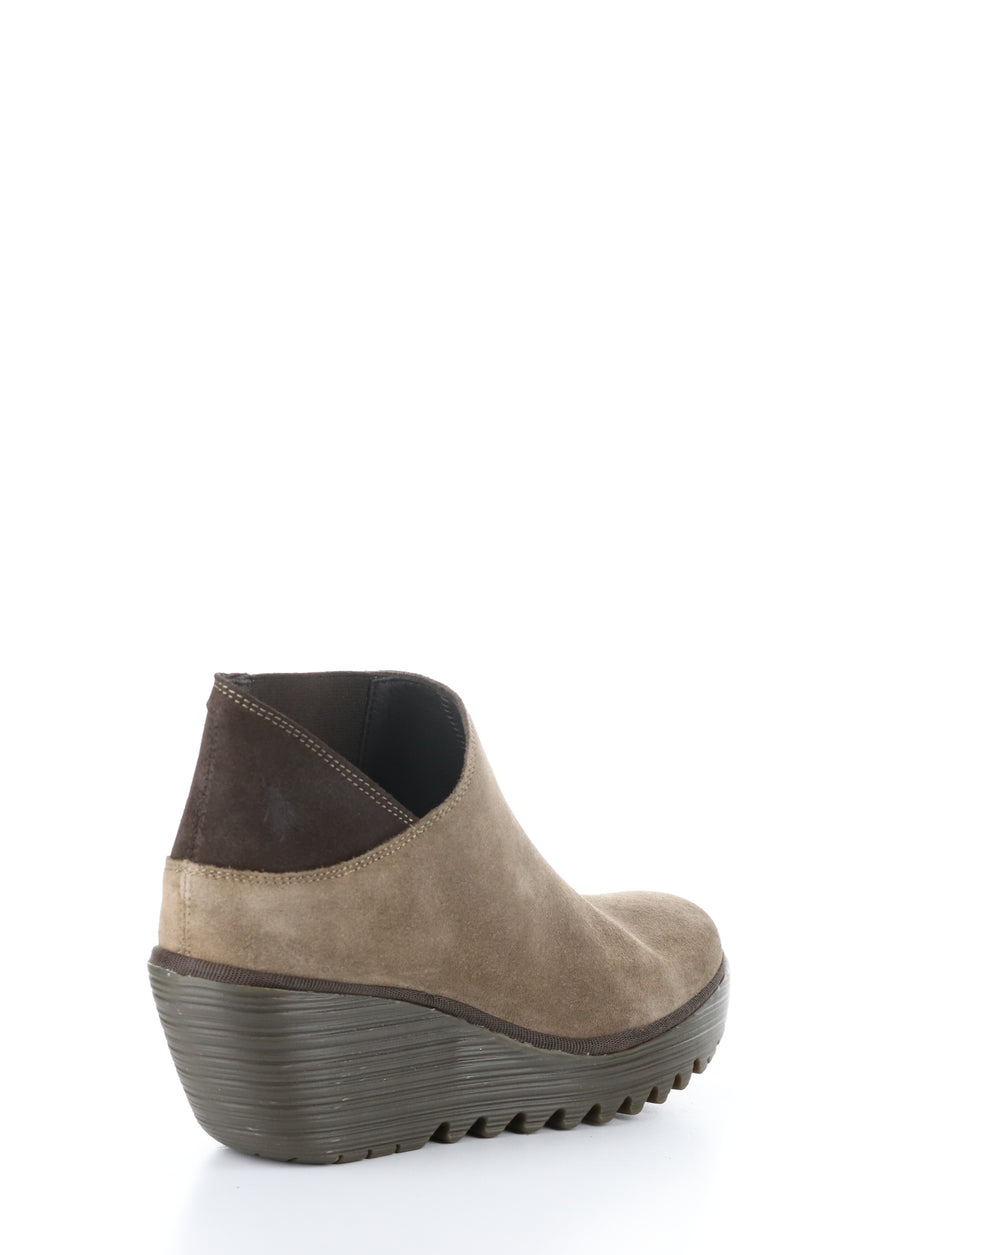 YEGO400FLY 006 TAUPE/EXPRESSO Elasticated Boots